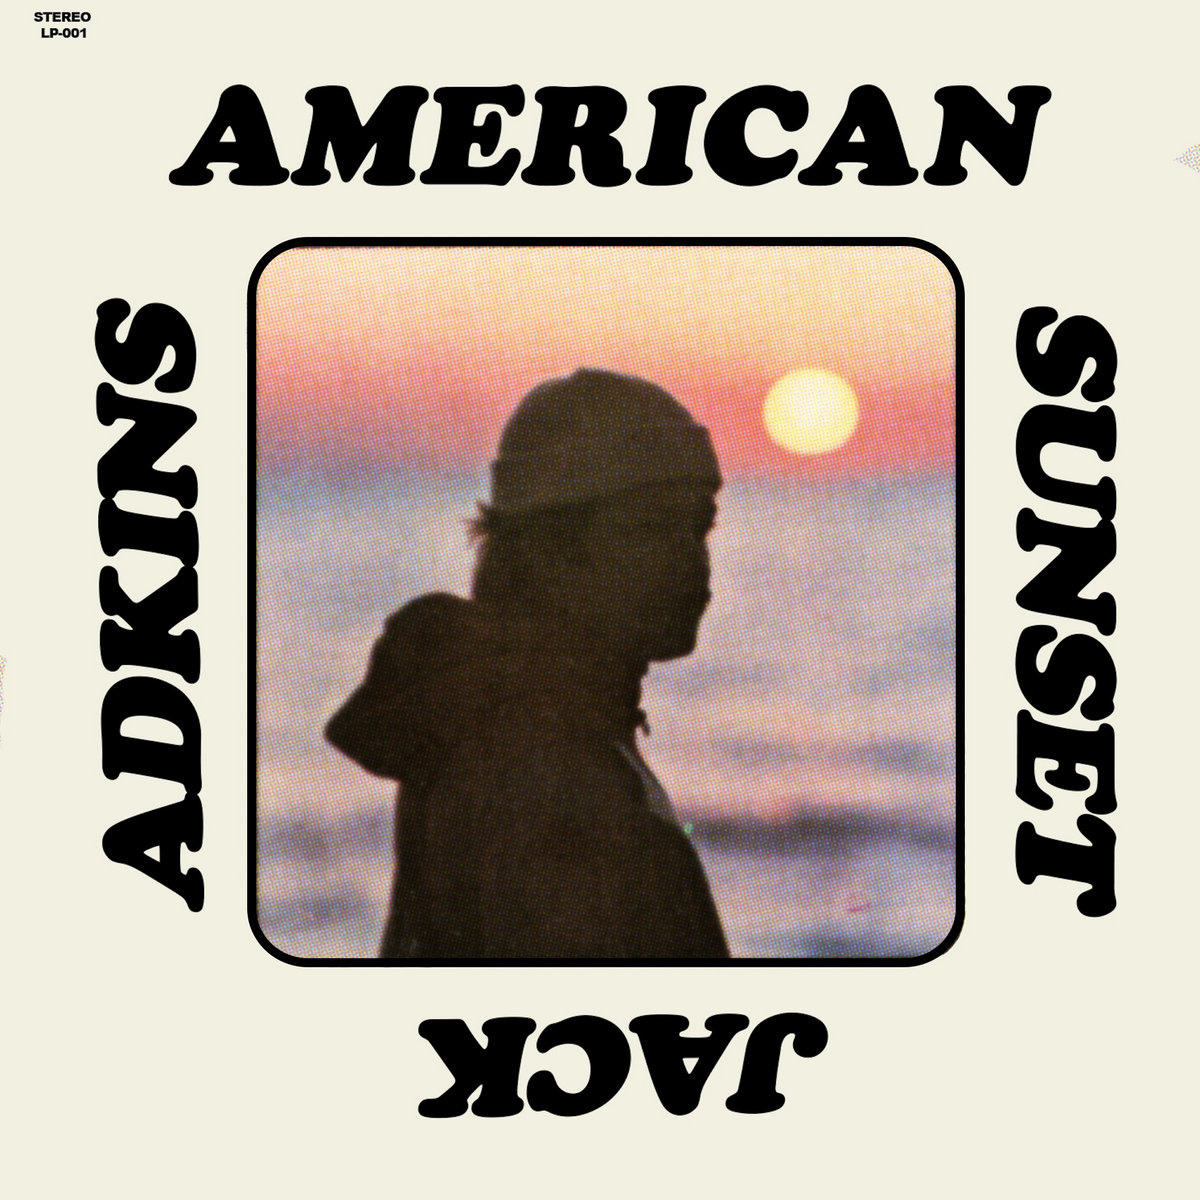 American Sunset | Jack Adkins | From The Stacks